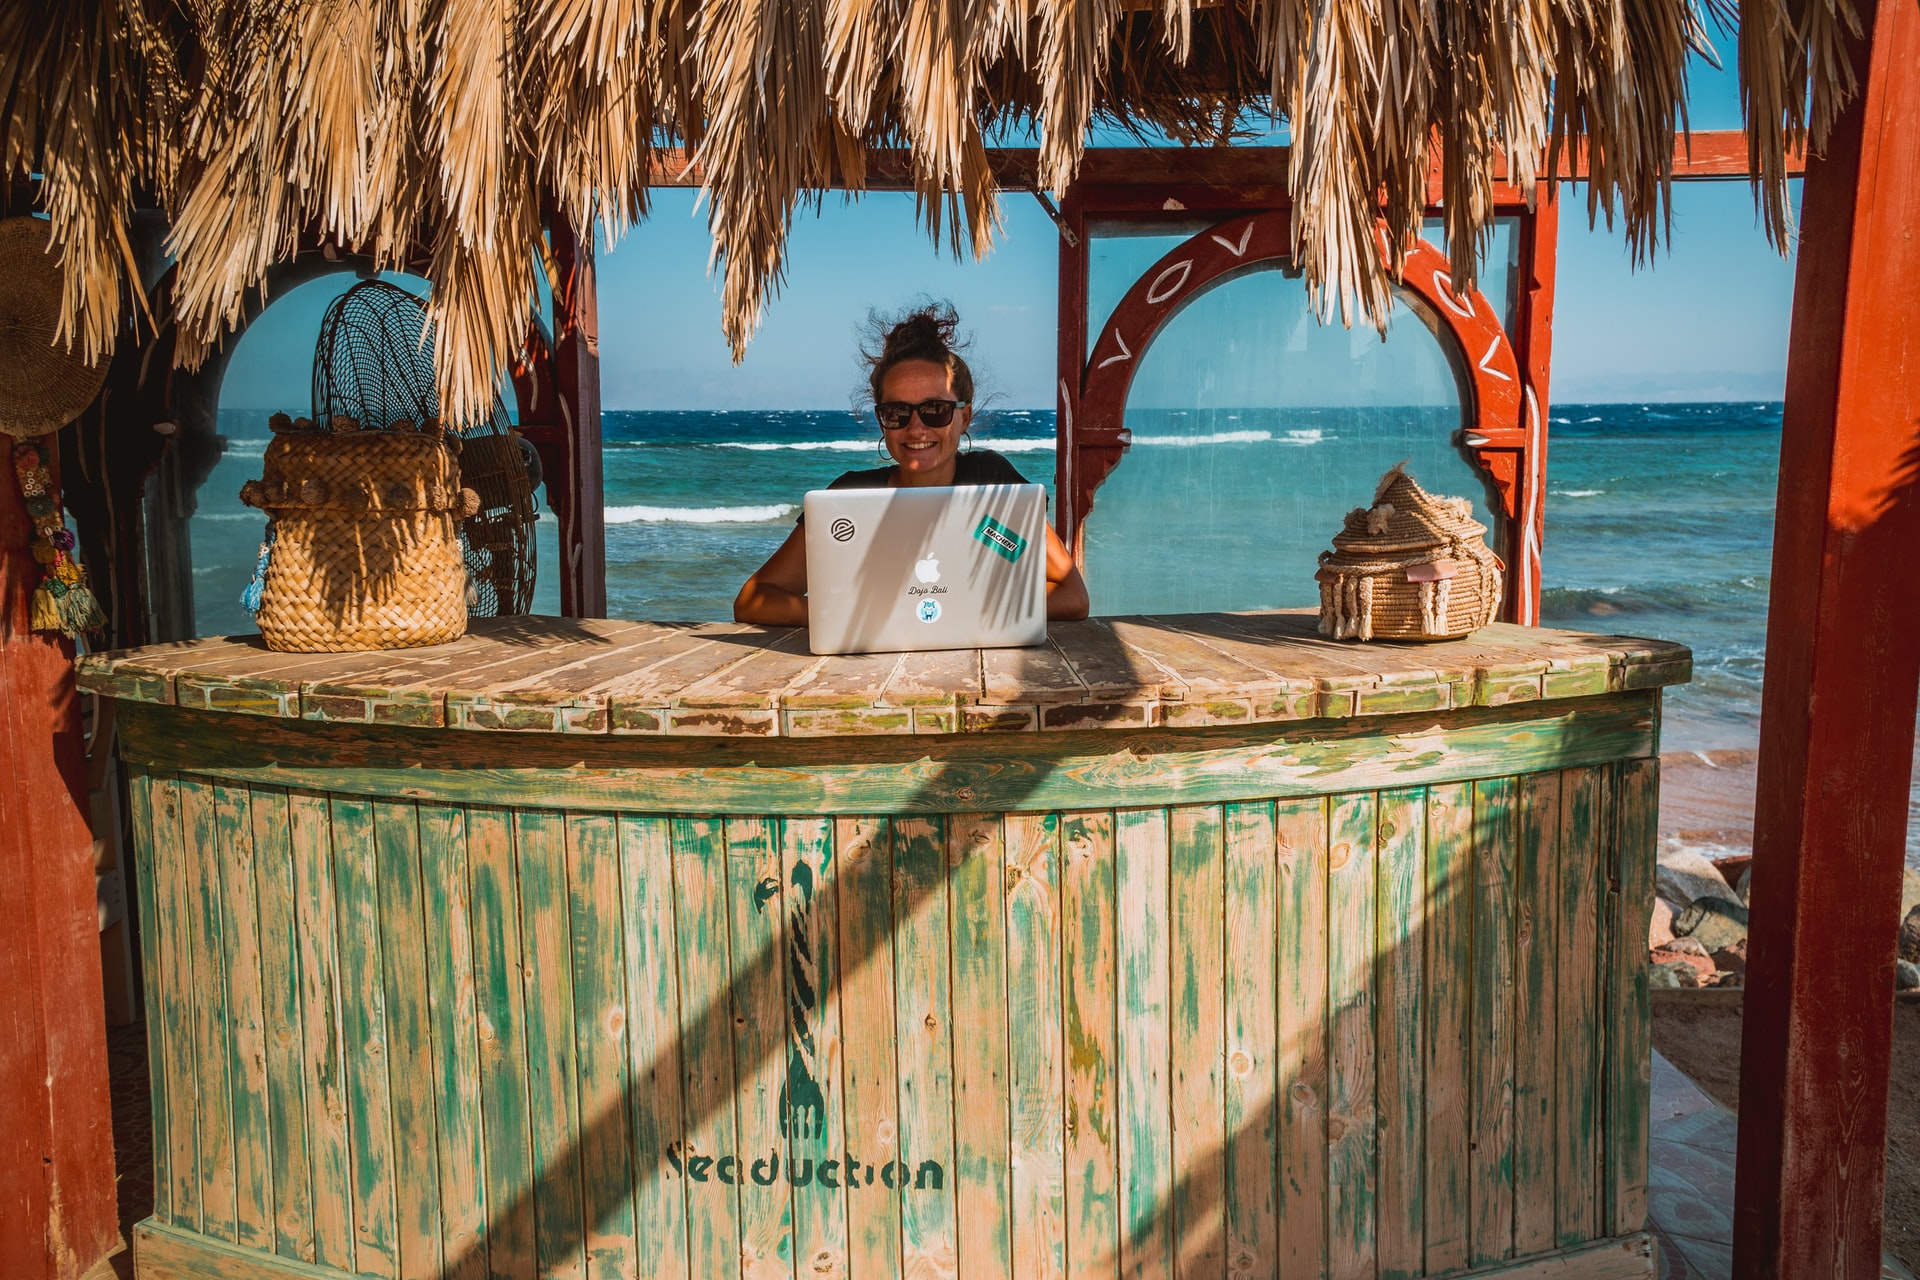 The 9 Best Digital Nomad Jobs In 2023